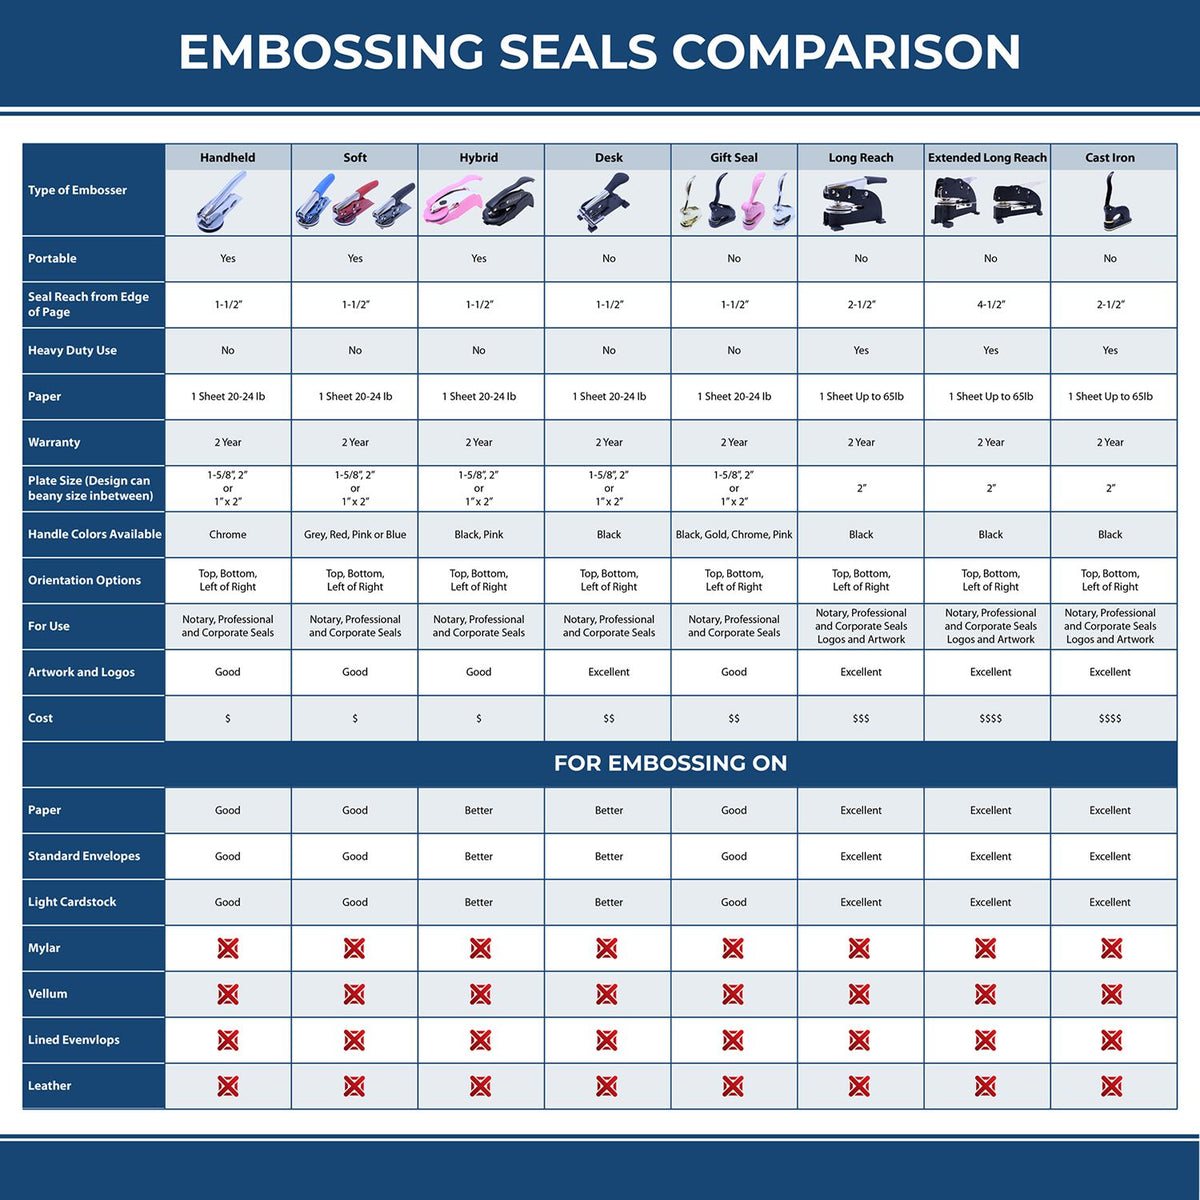 A comparison chart for the different types of mount models available for the Gift Montana Land Surveyor Seal